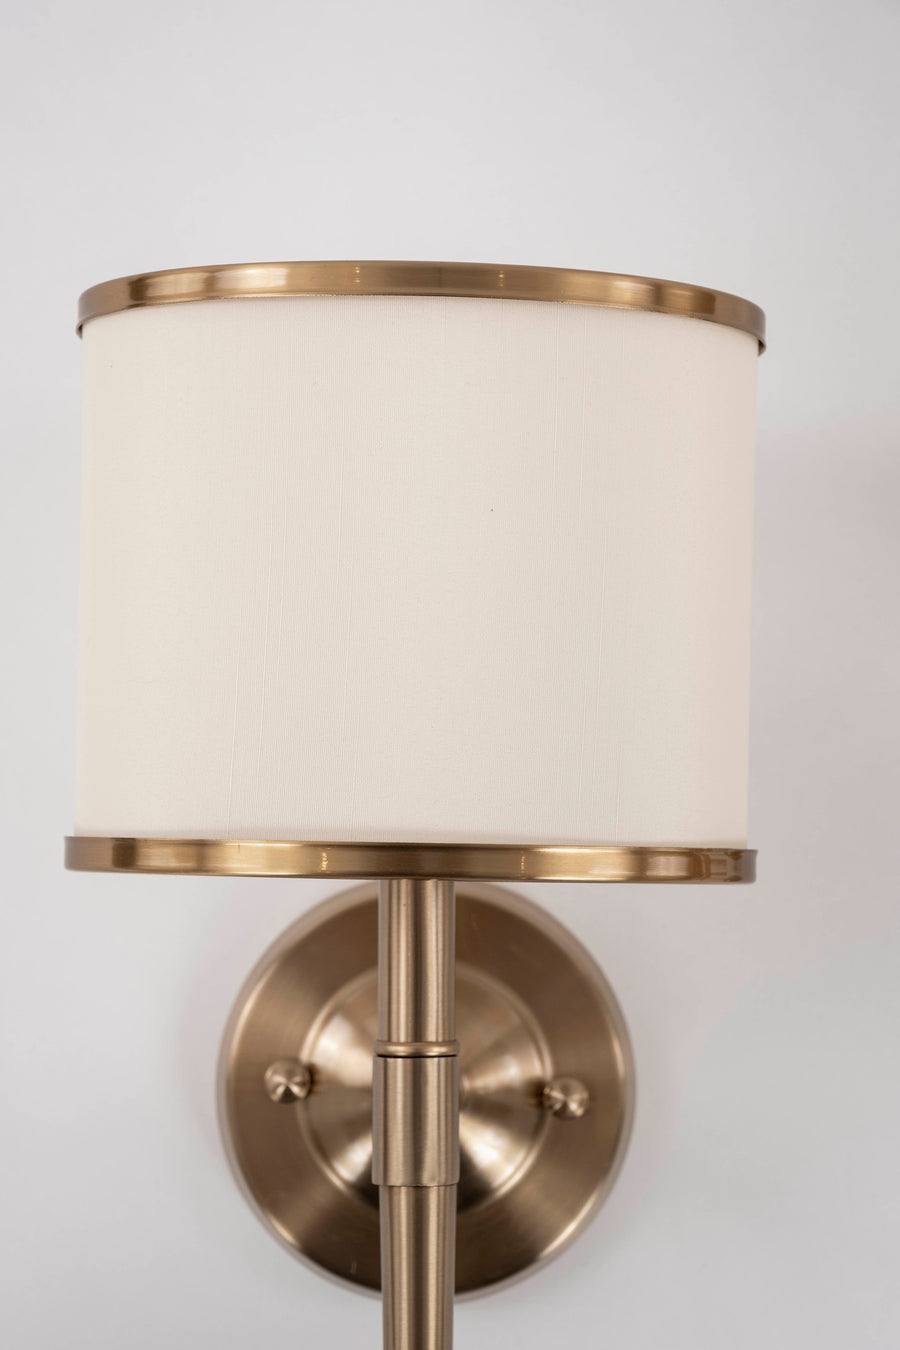 Pair Contemporary Brass Wall Sconce